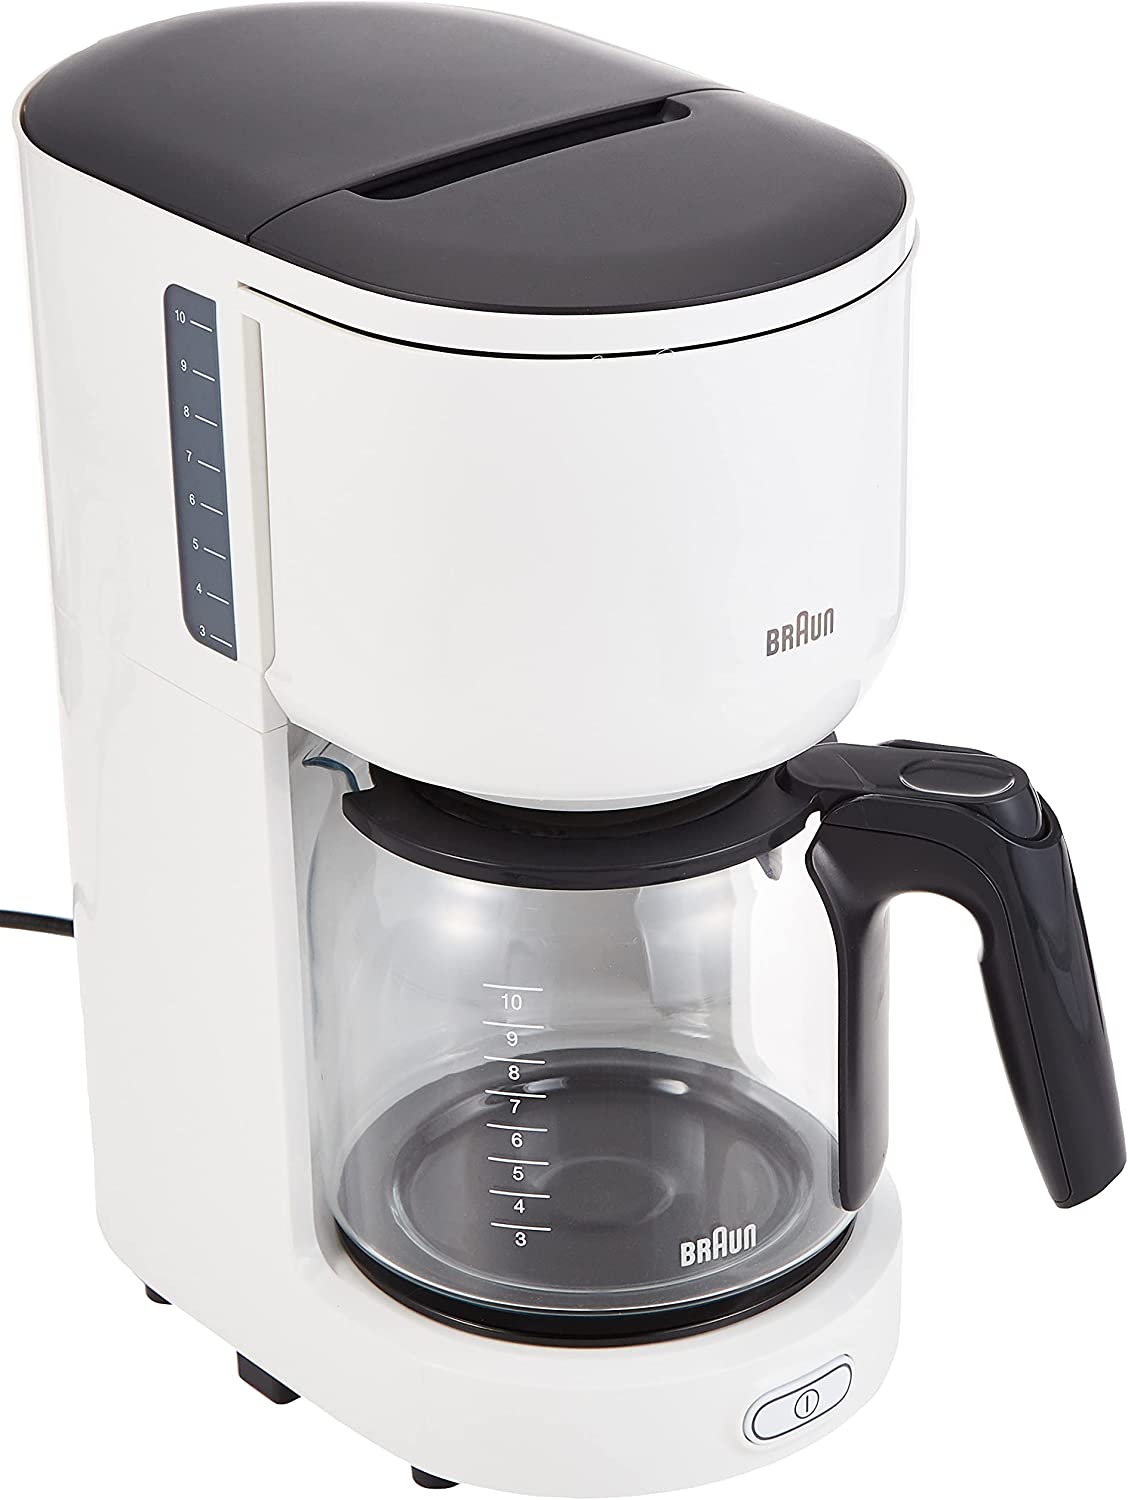 Braun PurEase KF 3120 BK Coffee Machine - Filter Coffee Maker with Glass Jug for 10 Cups of Coffee, Coffee Maker for Unique Aroma, Integrated Water Filter, 1000 Watt, Black